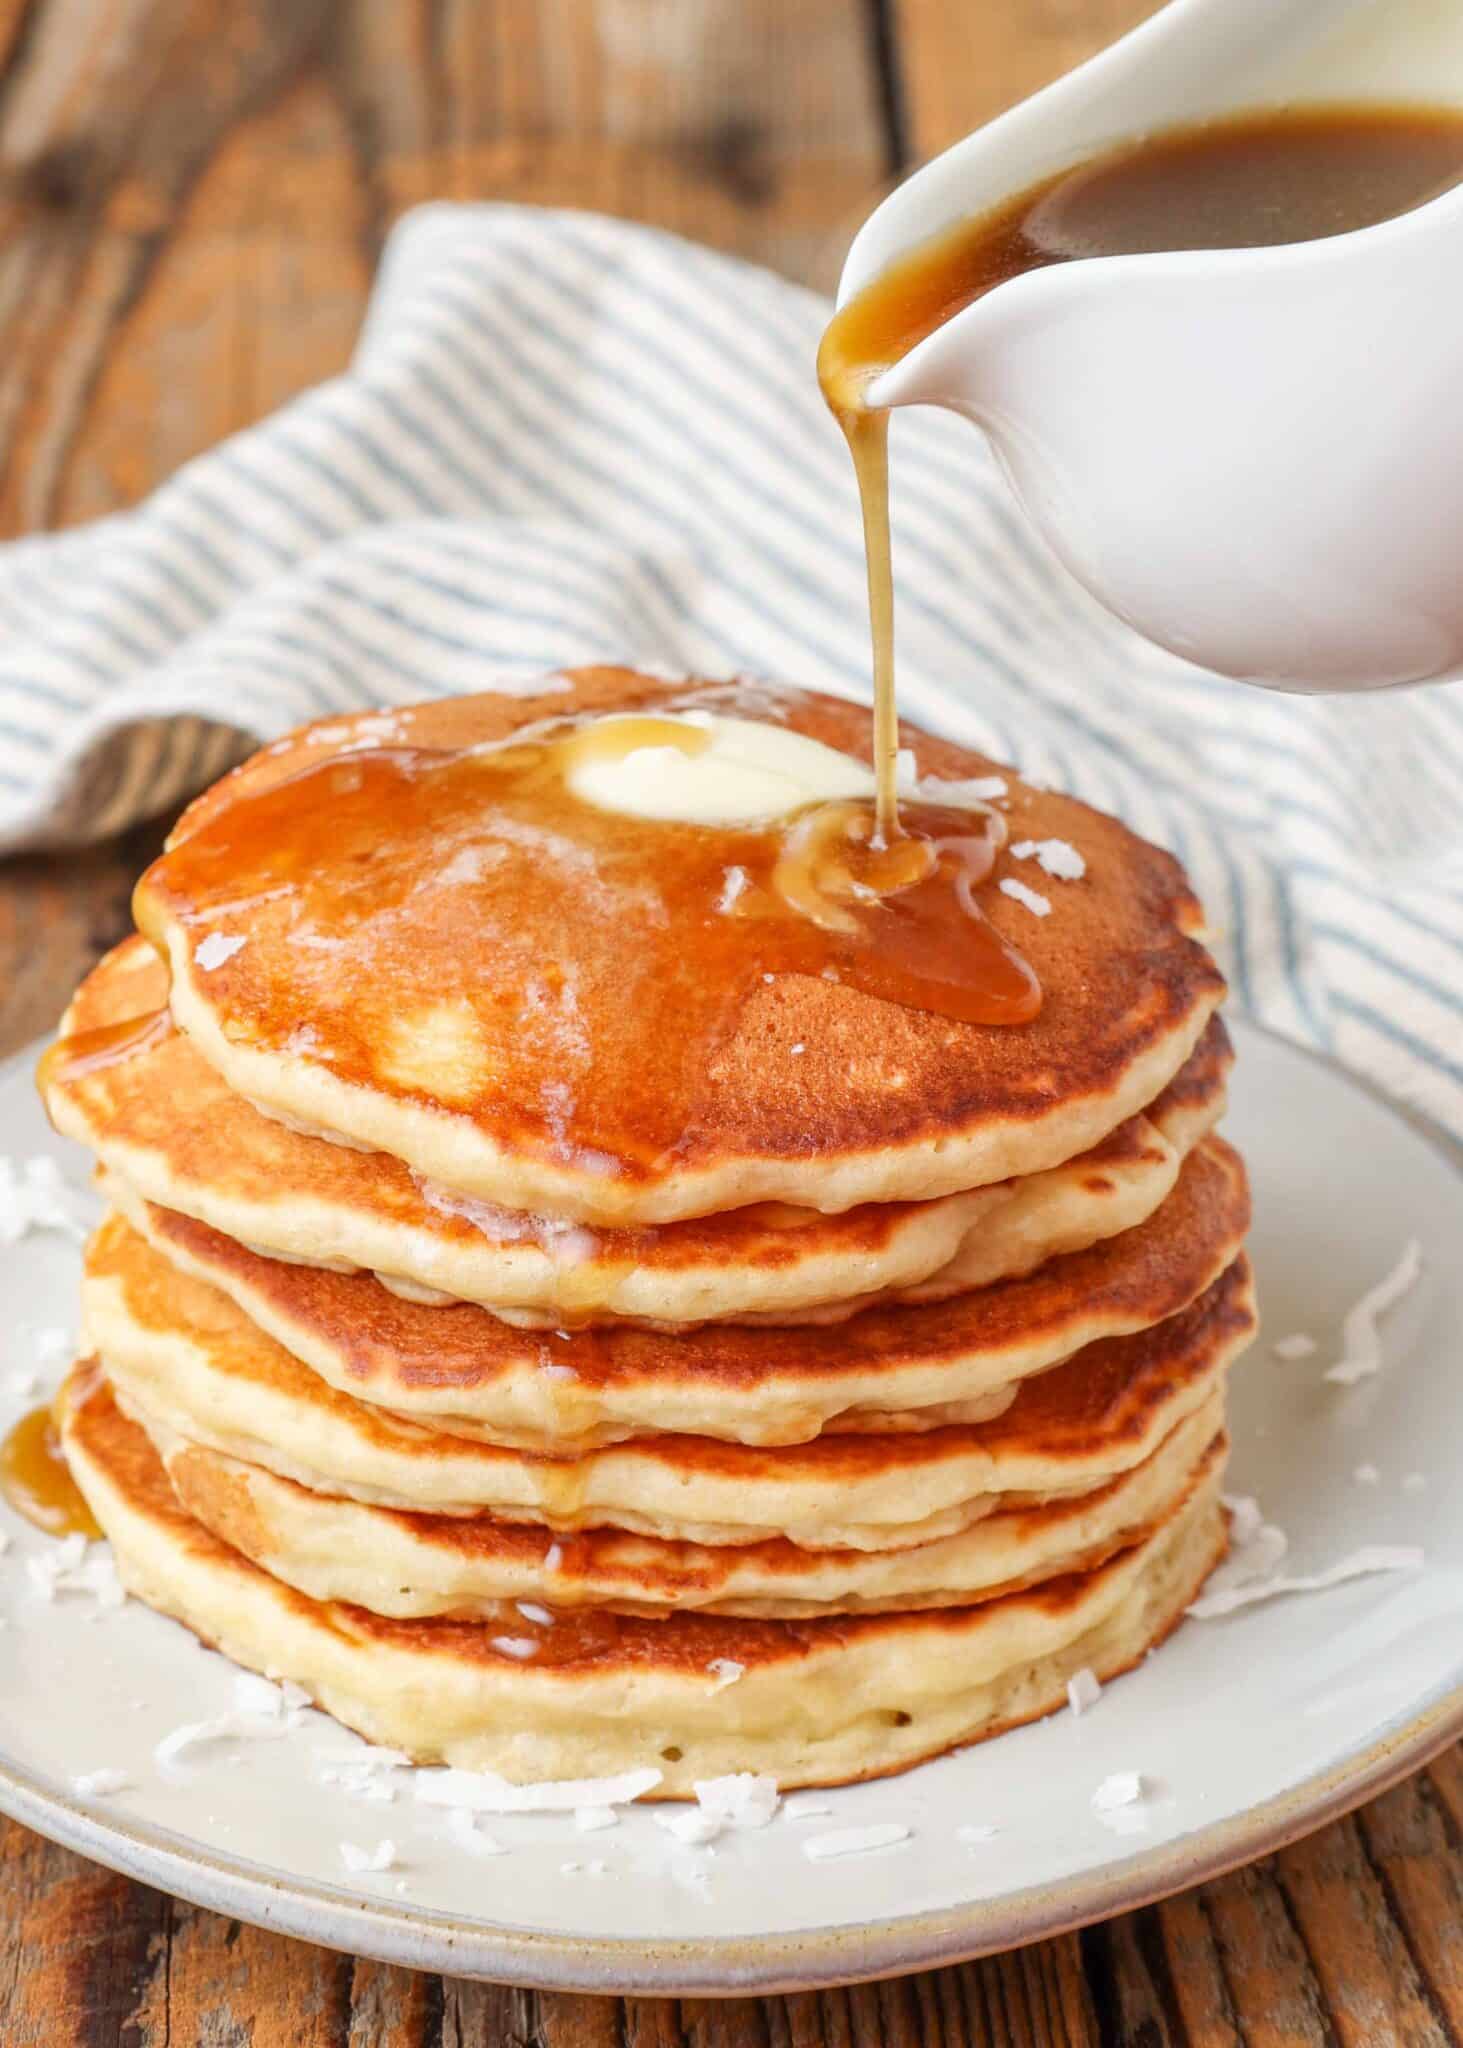 A stack of pancakes with brown sugar syrup.